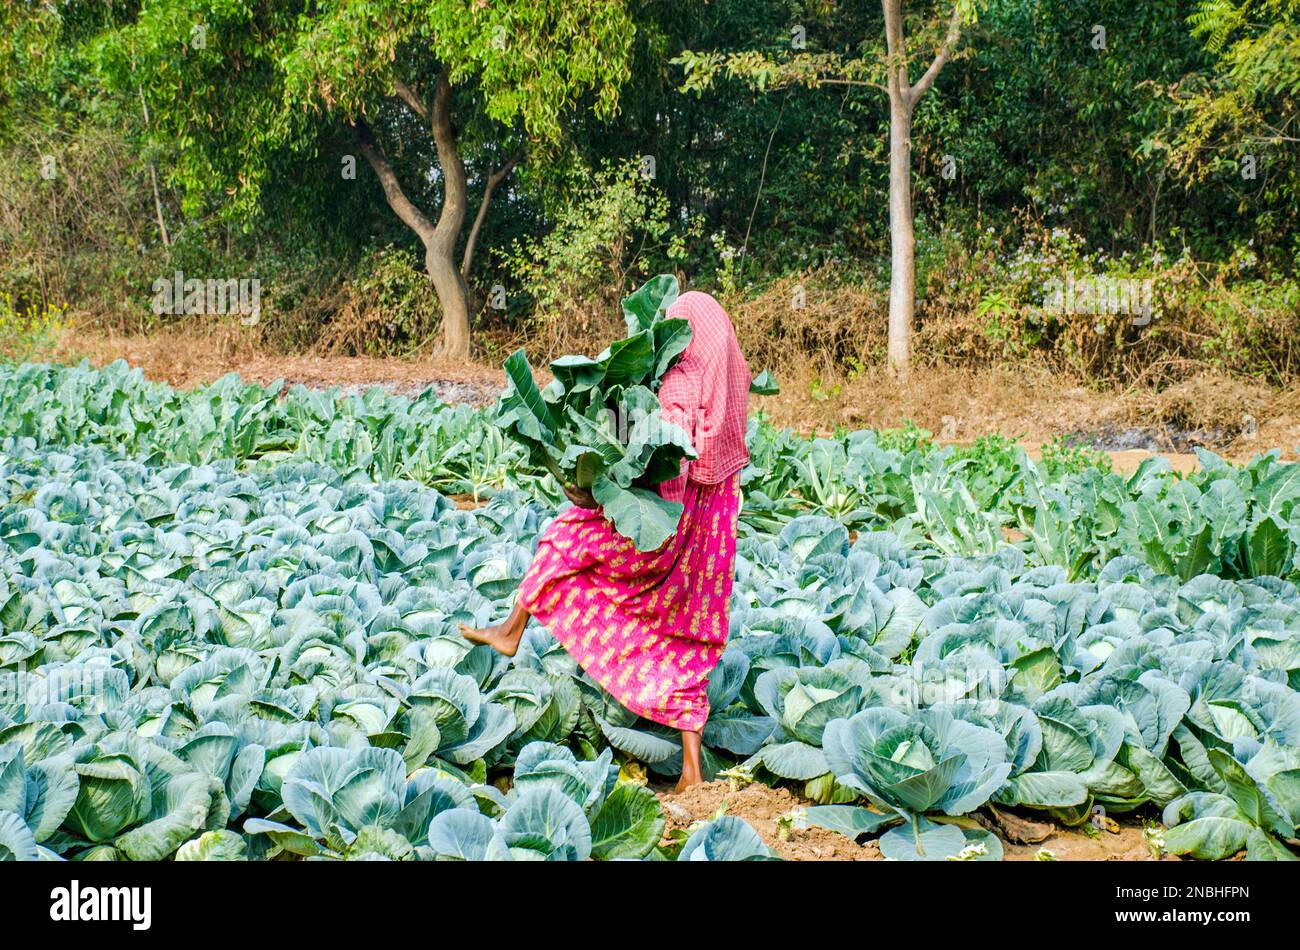 cauliflower cultivation at west bengal india Stock Photo